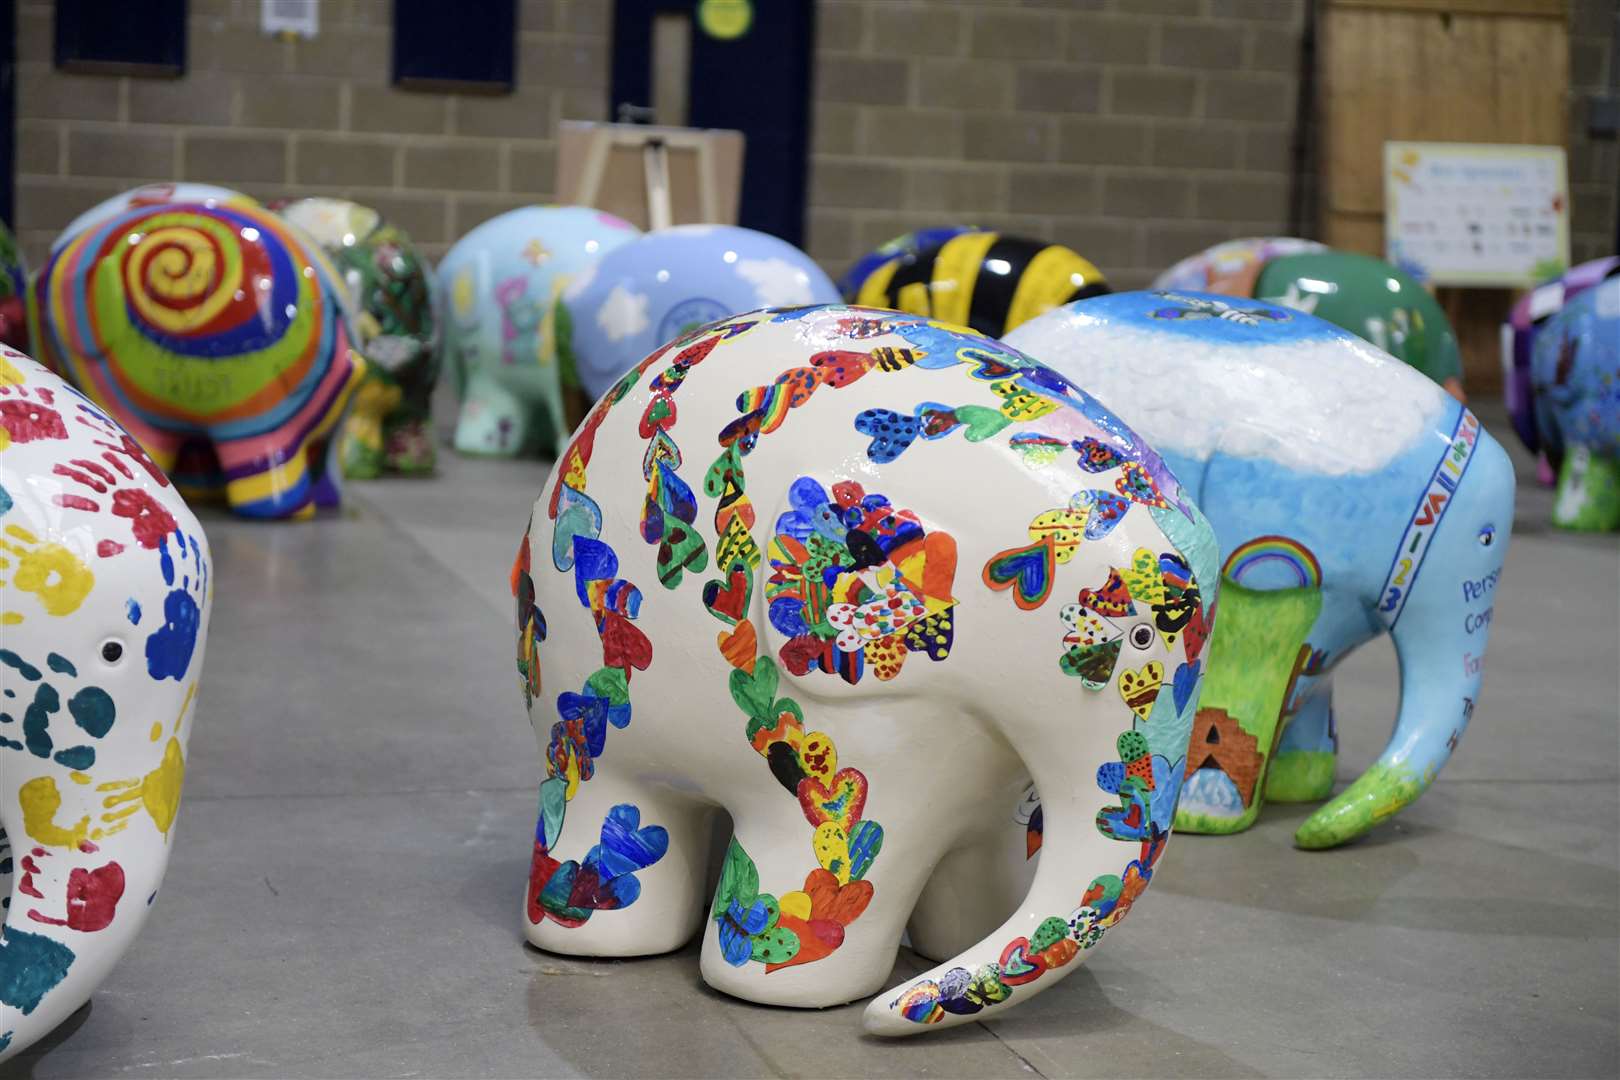 A total of 82 Elmer sculptures were created by different artists